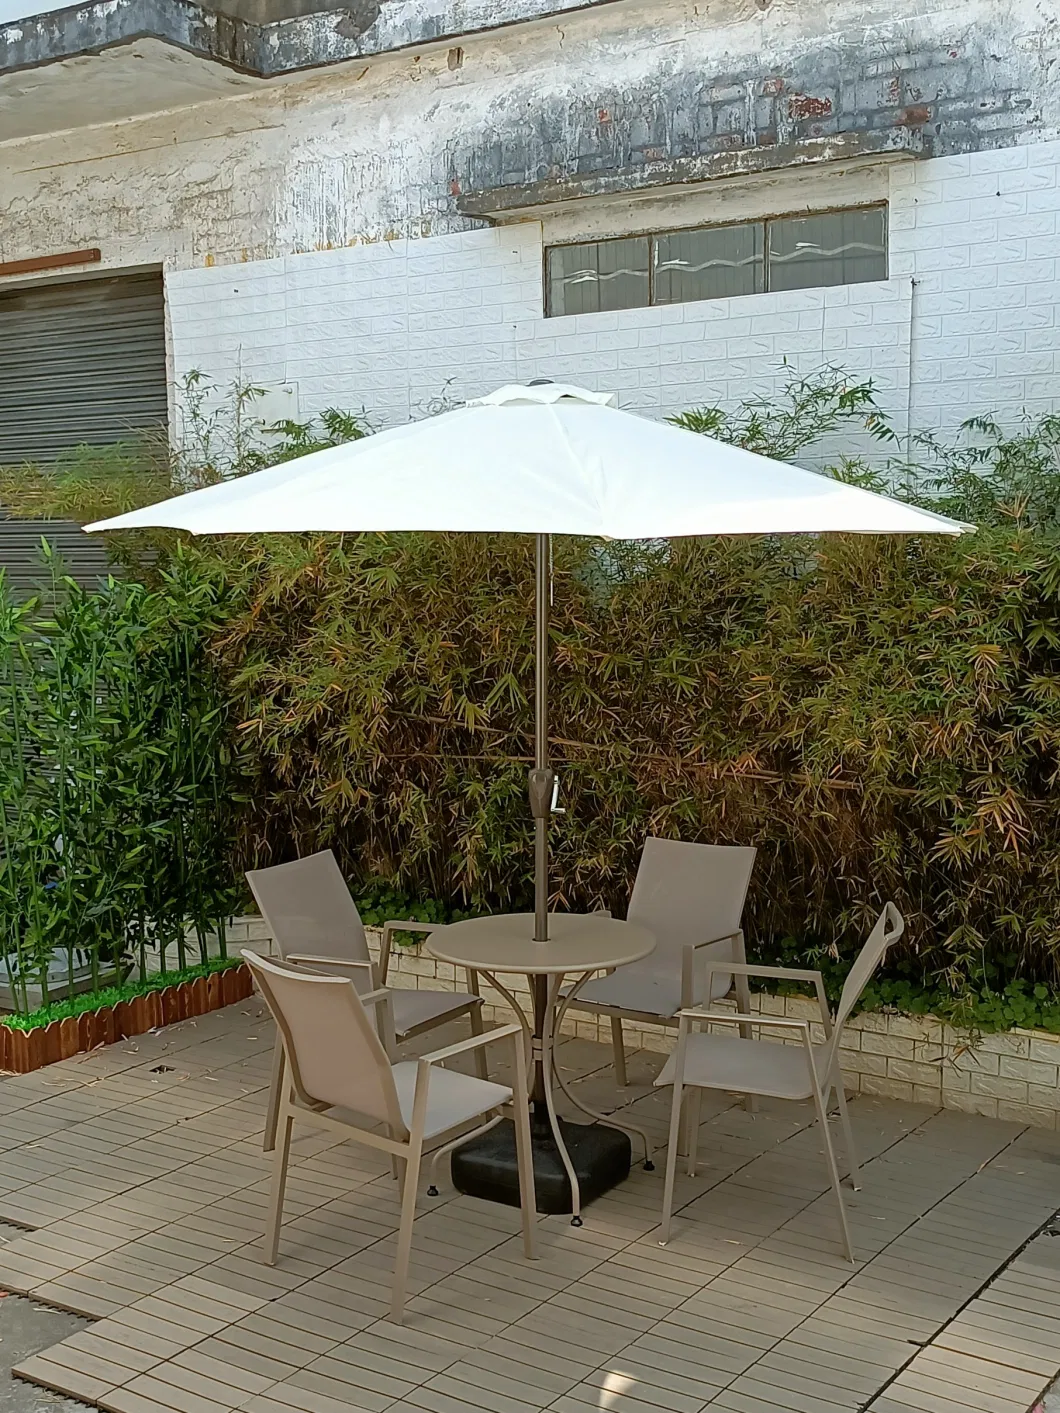 Popular Garden Furniture Patio Bistro Set Outdoor Cafe Restaurant Dining Waterproof Garden Terrace Woven Rope Table and Chairs